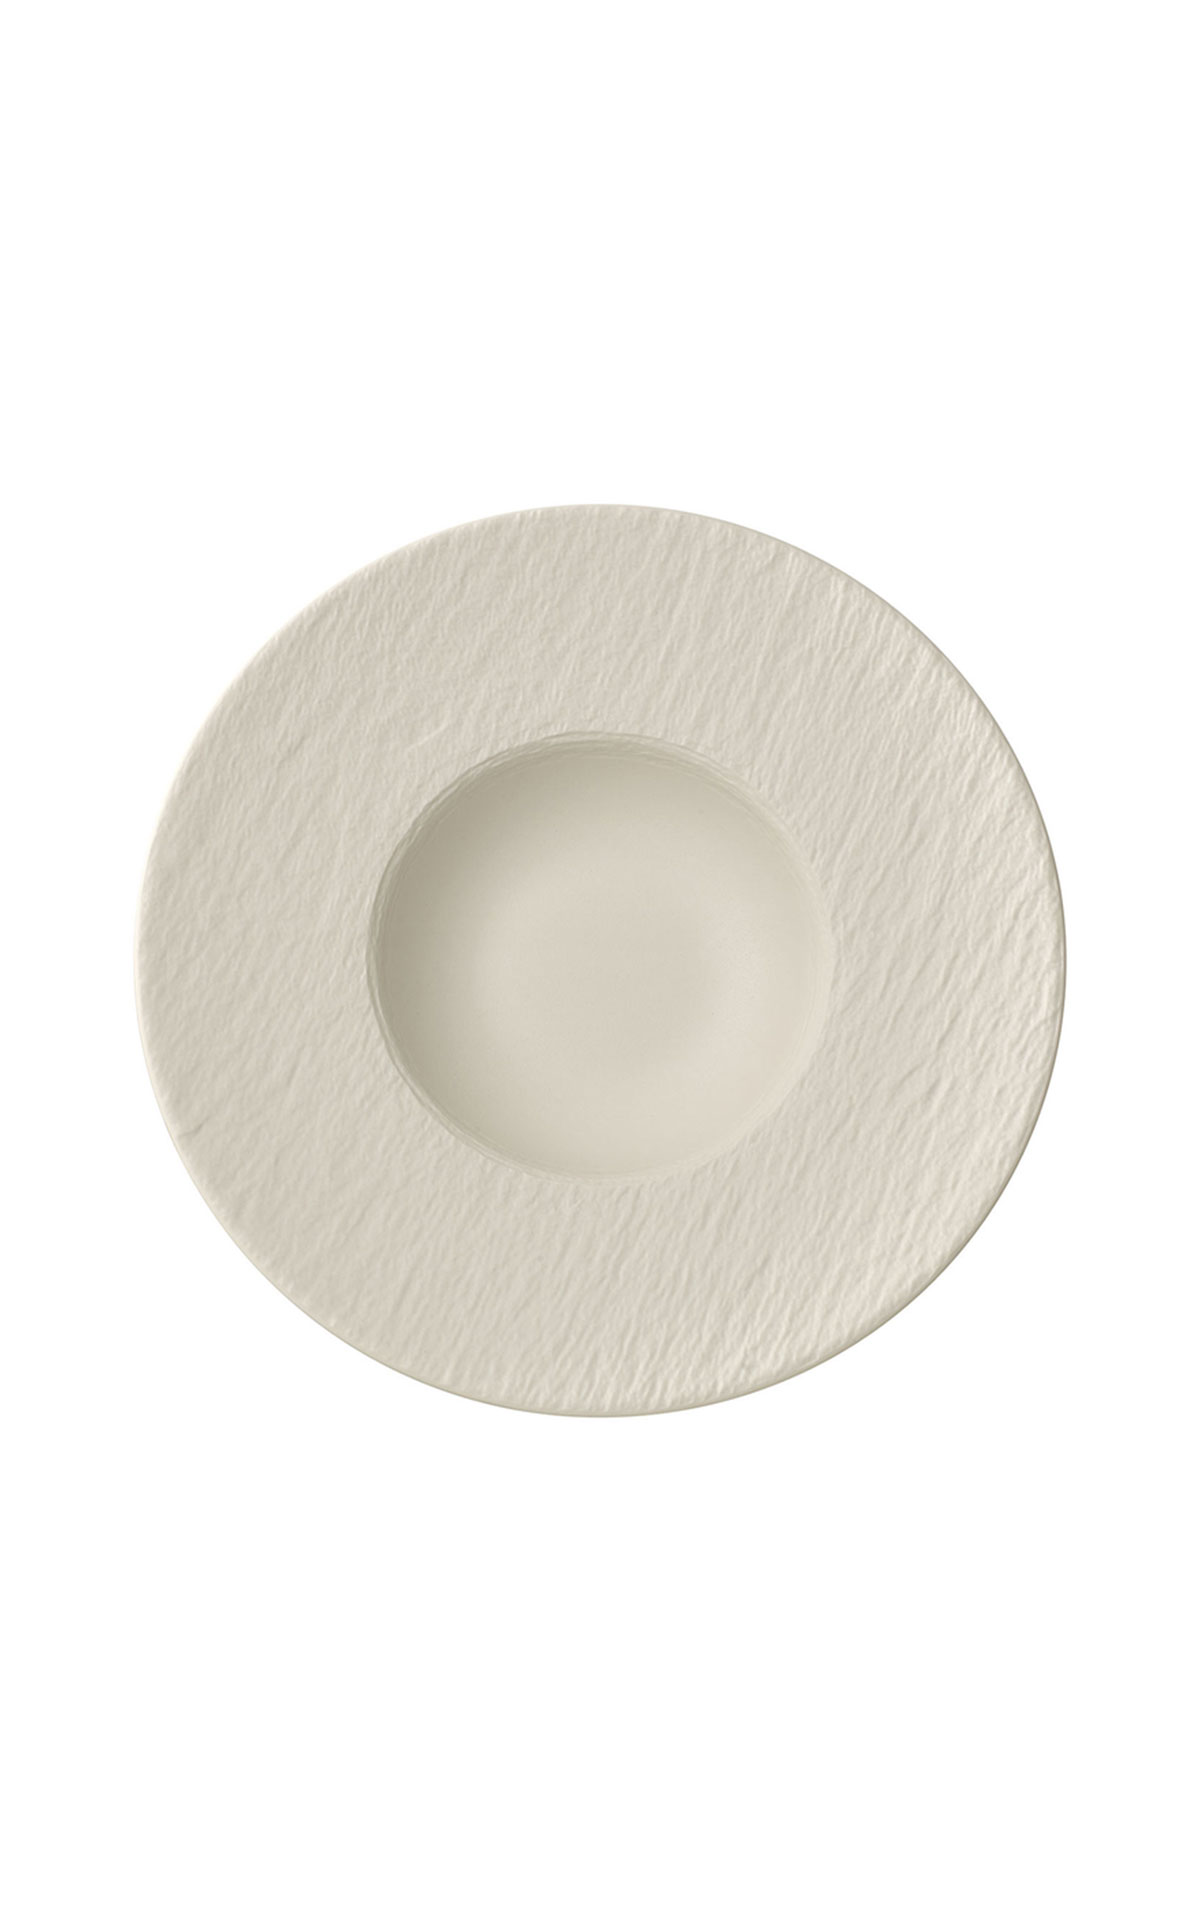 Villeroy and Boch Manufacture blanc deep Plate  from Bicester Village